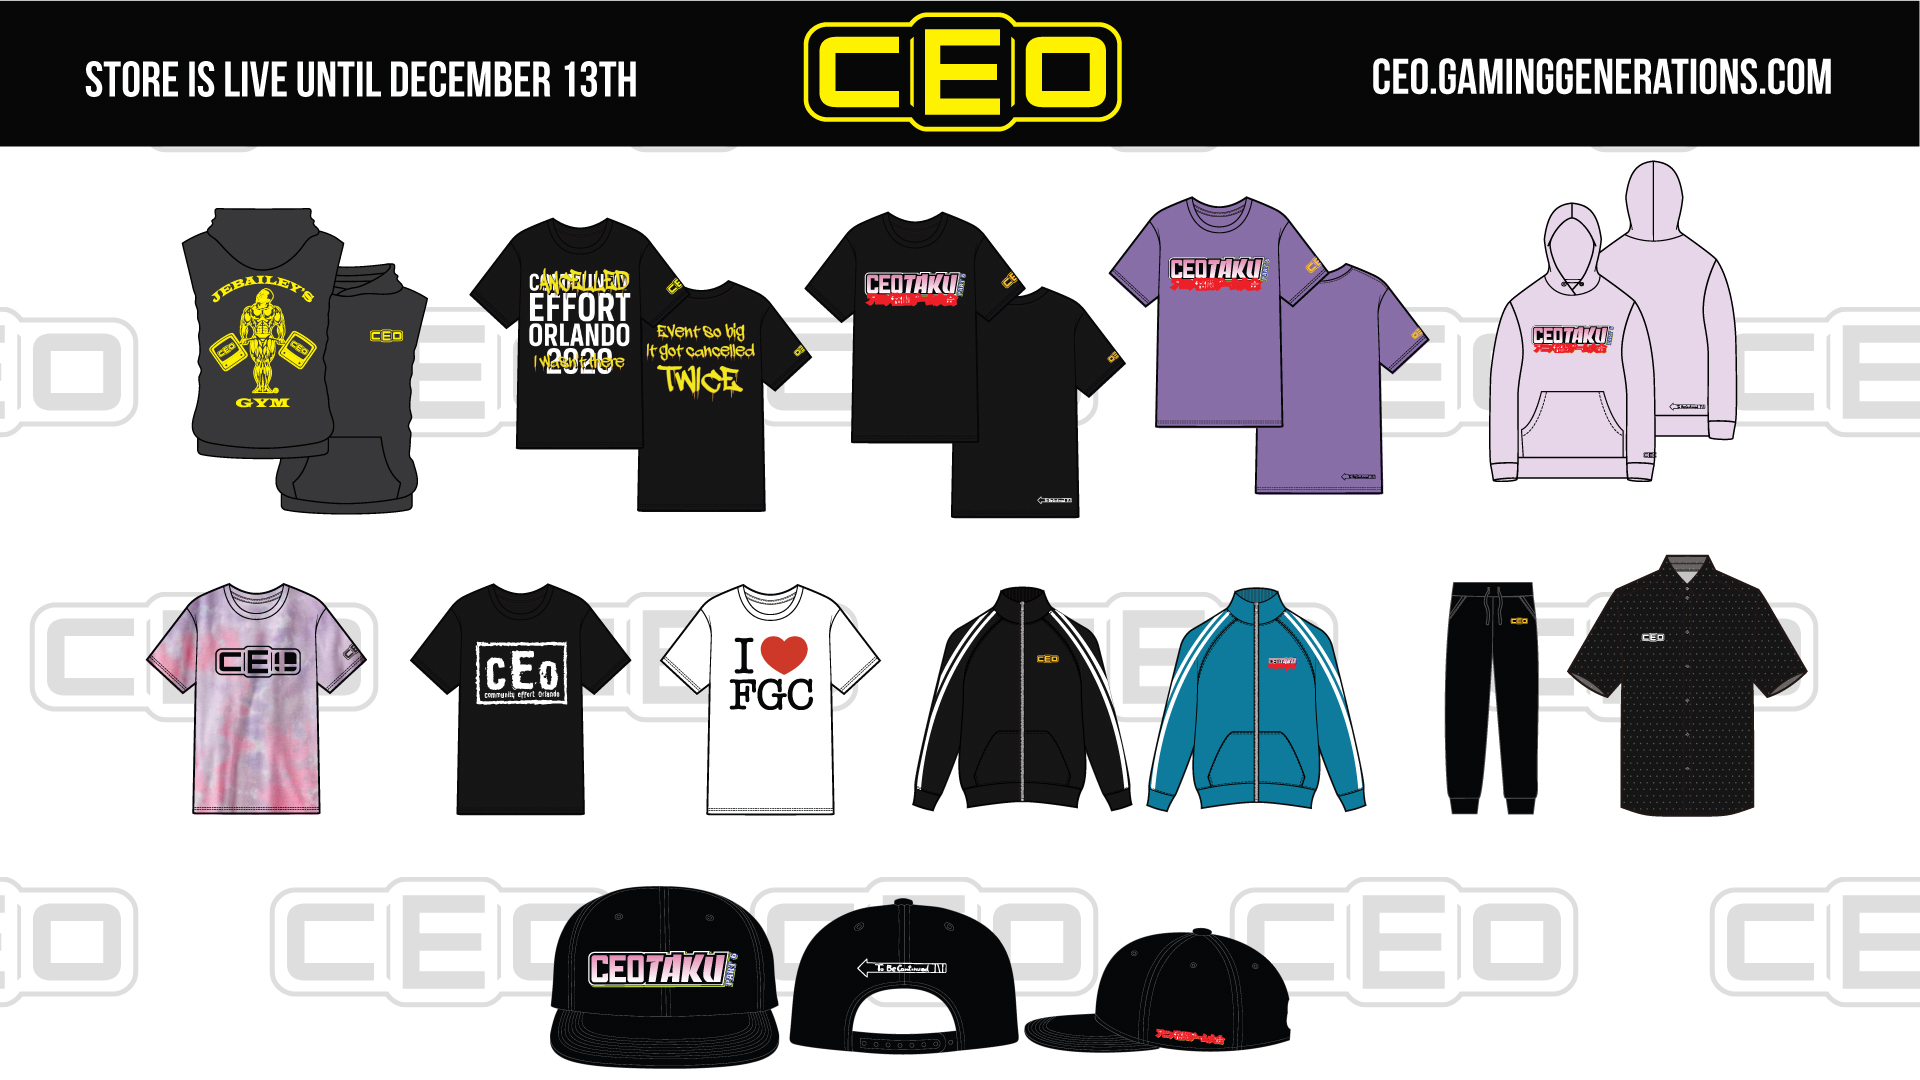 CEO – Fighting Game Championships